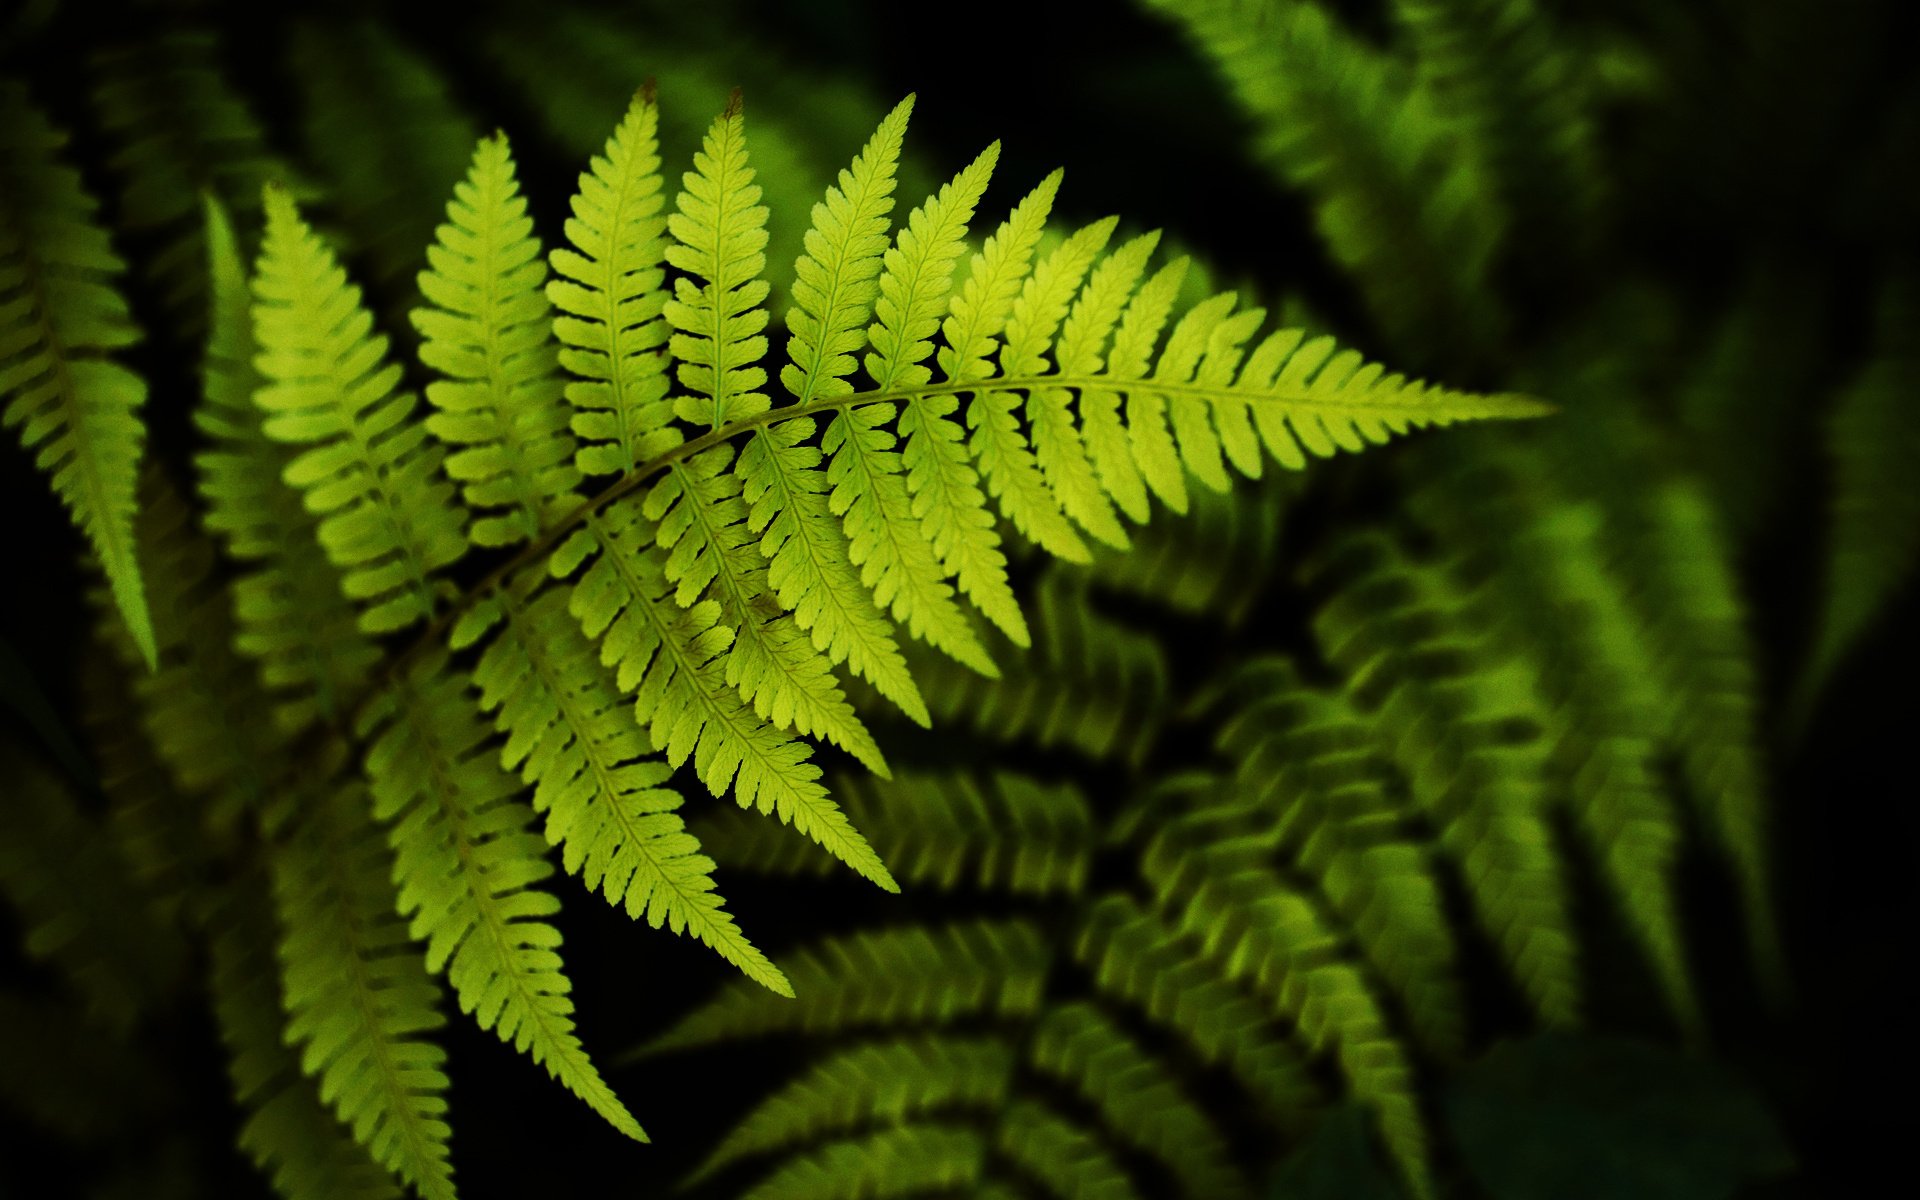 Fern Wallpapers and Background Images - stmed.net